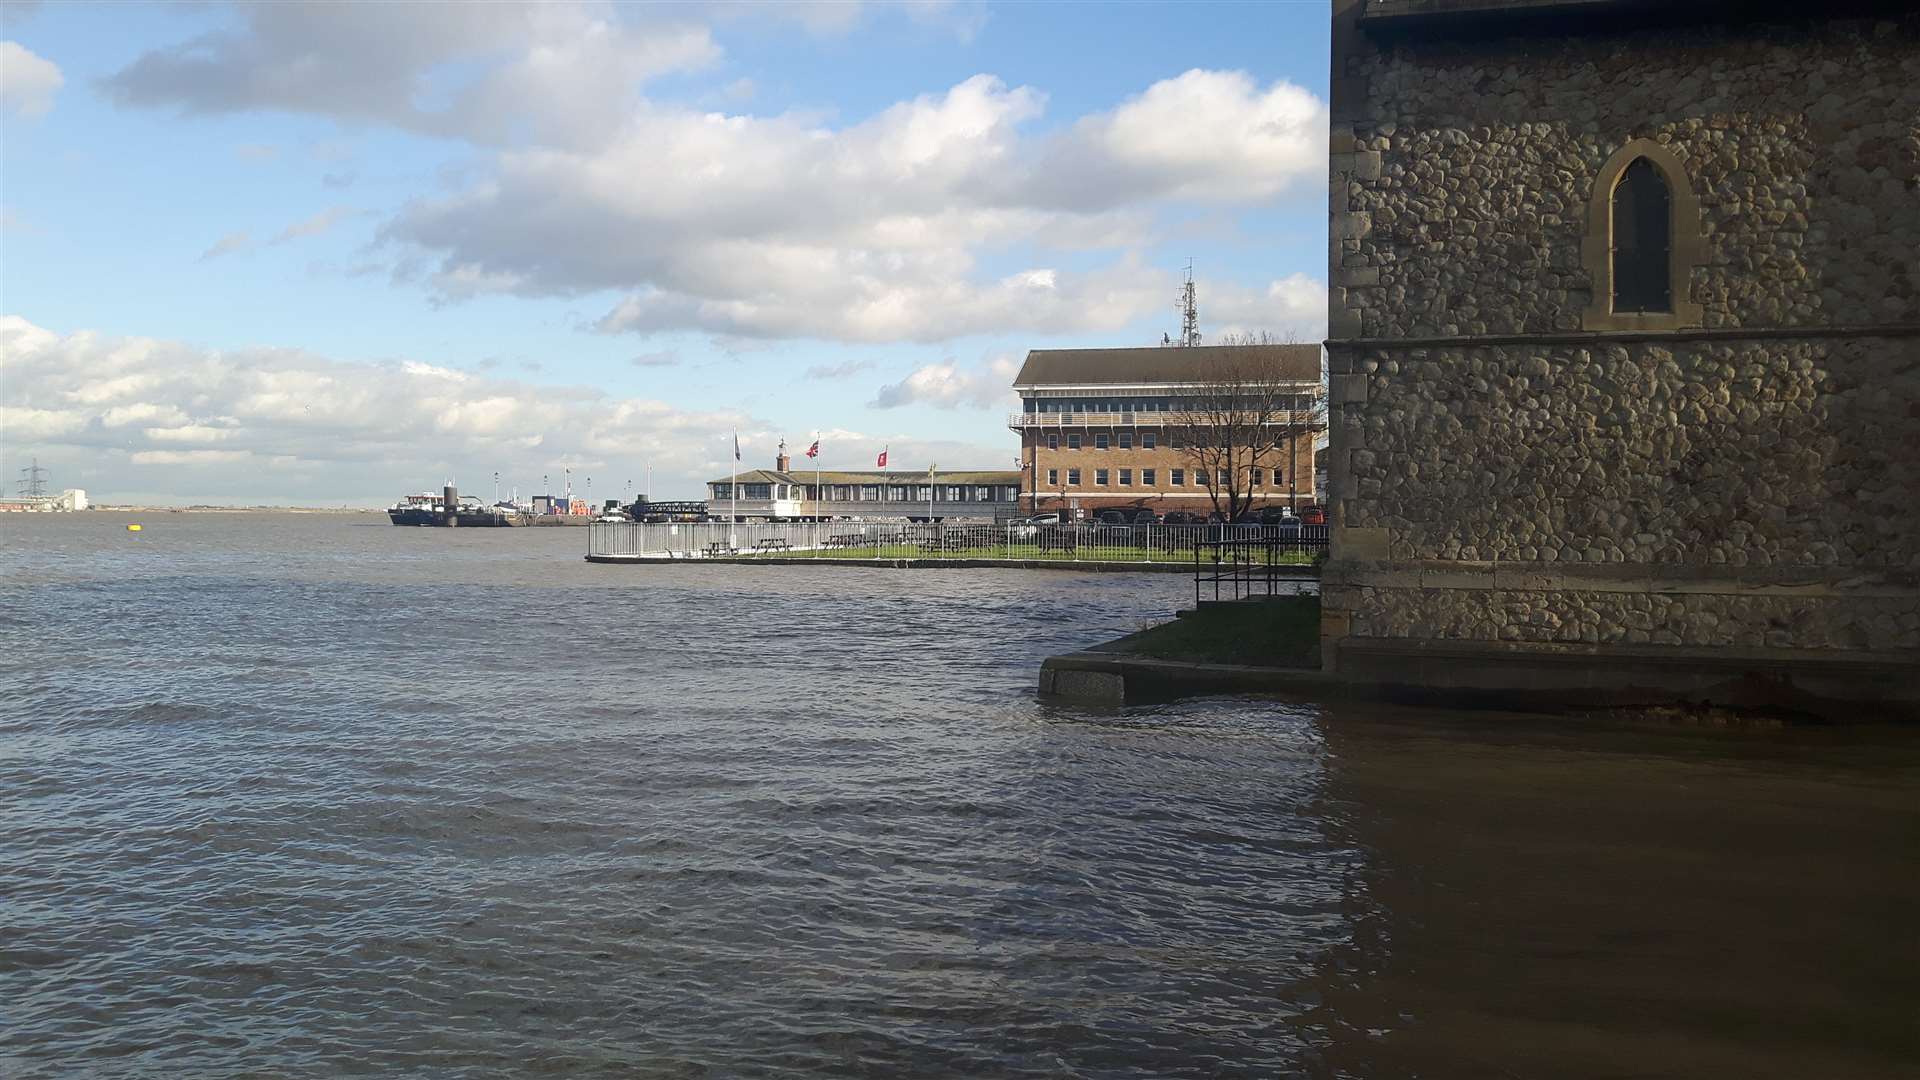 Flooding by the shore in Gravesend